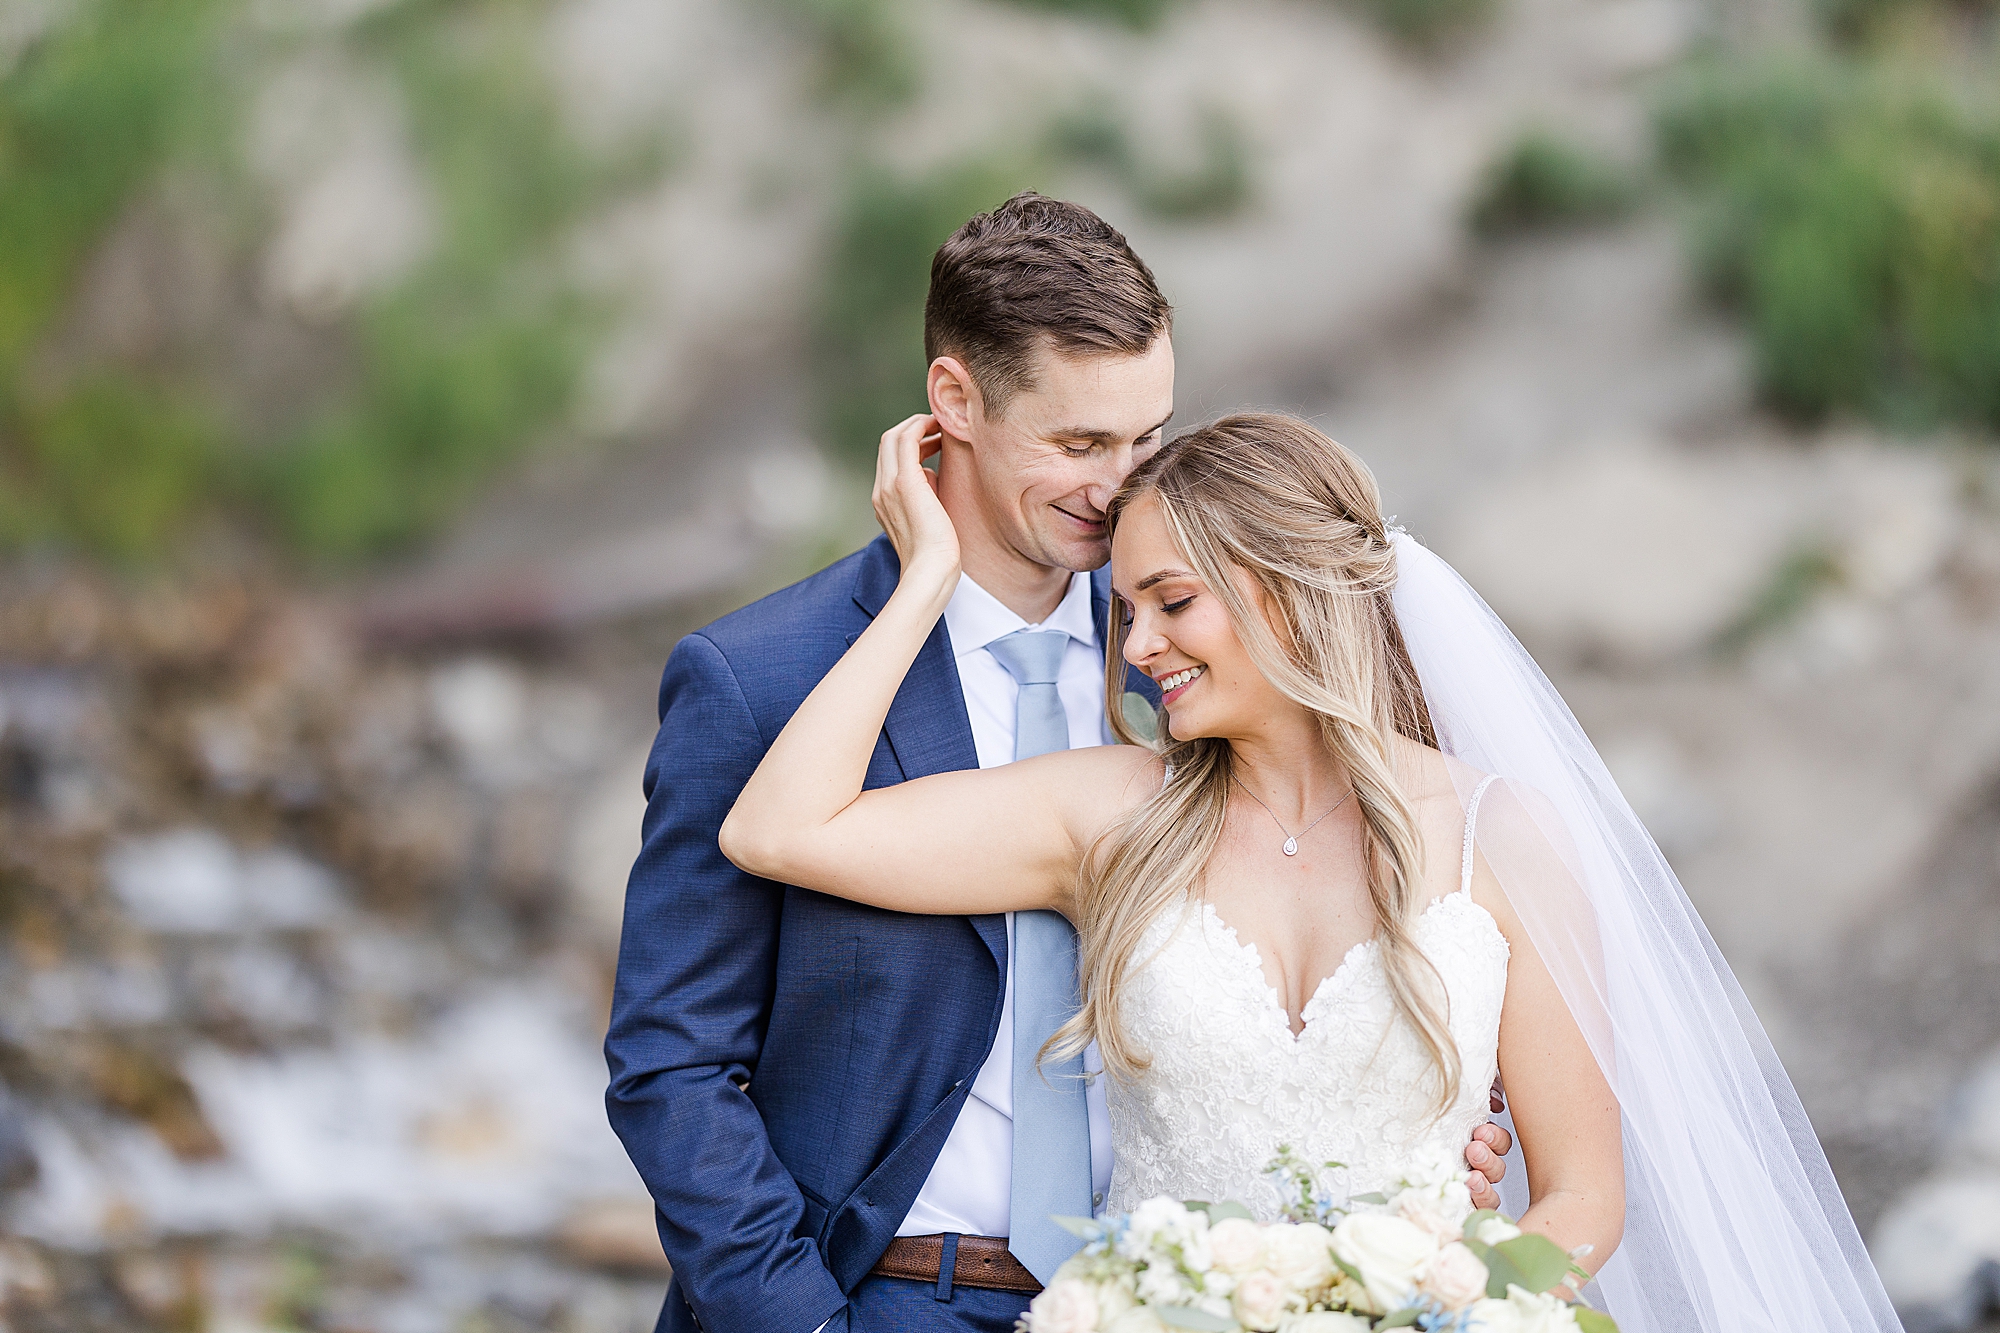 Intimate wedding experience with Rachel Lindsey Photography